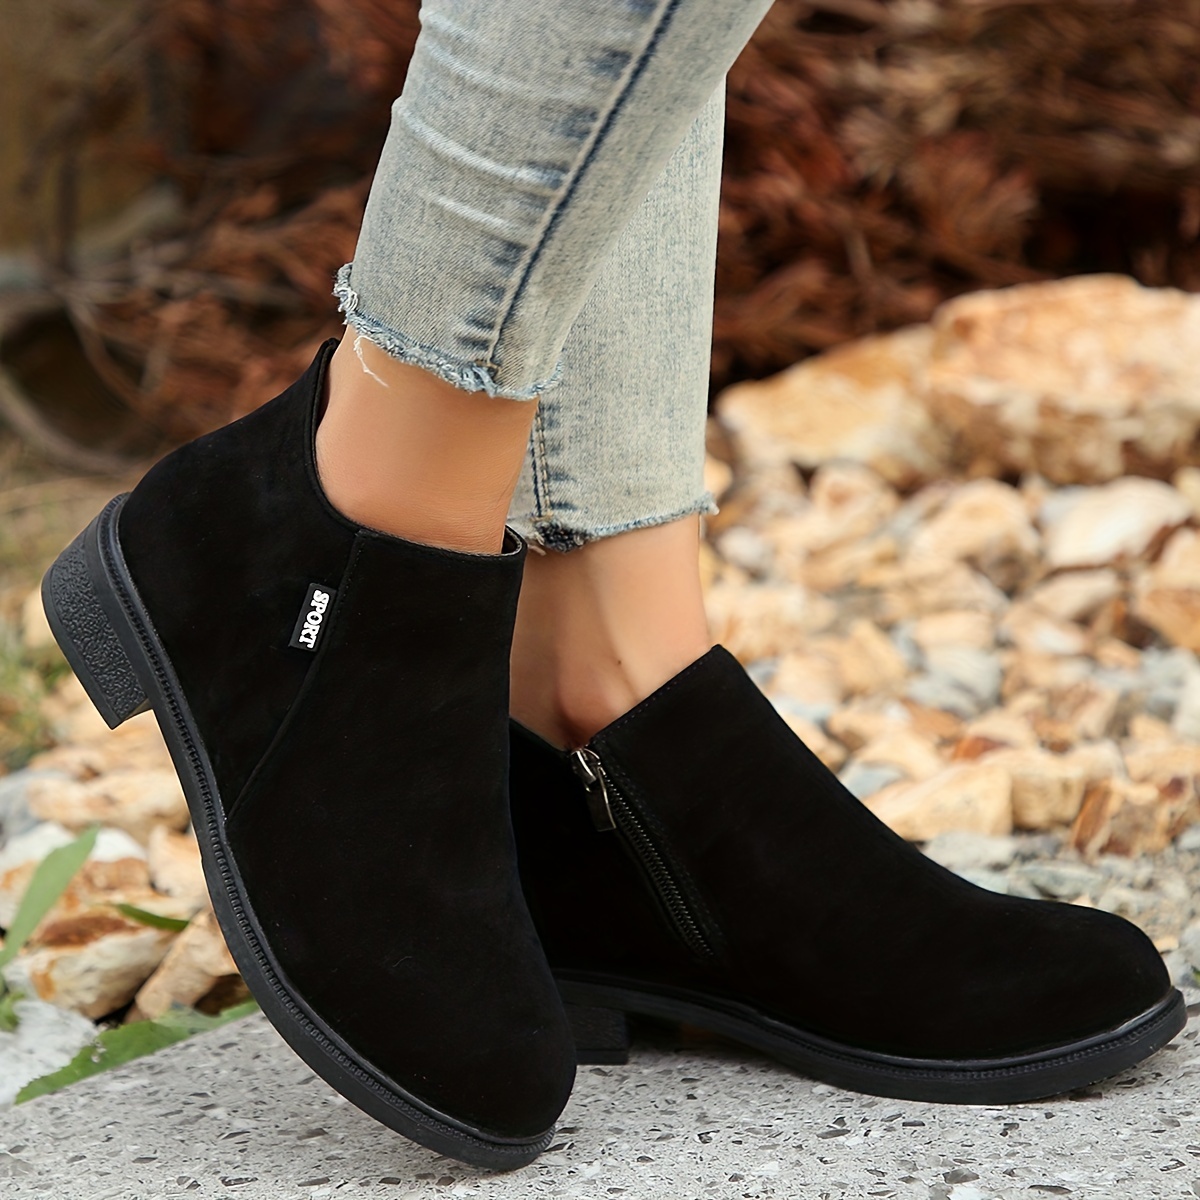 Women's Solid Color Chunky Heel Short Boots, Fashion Side Zipper